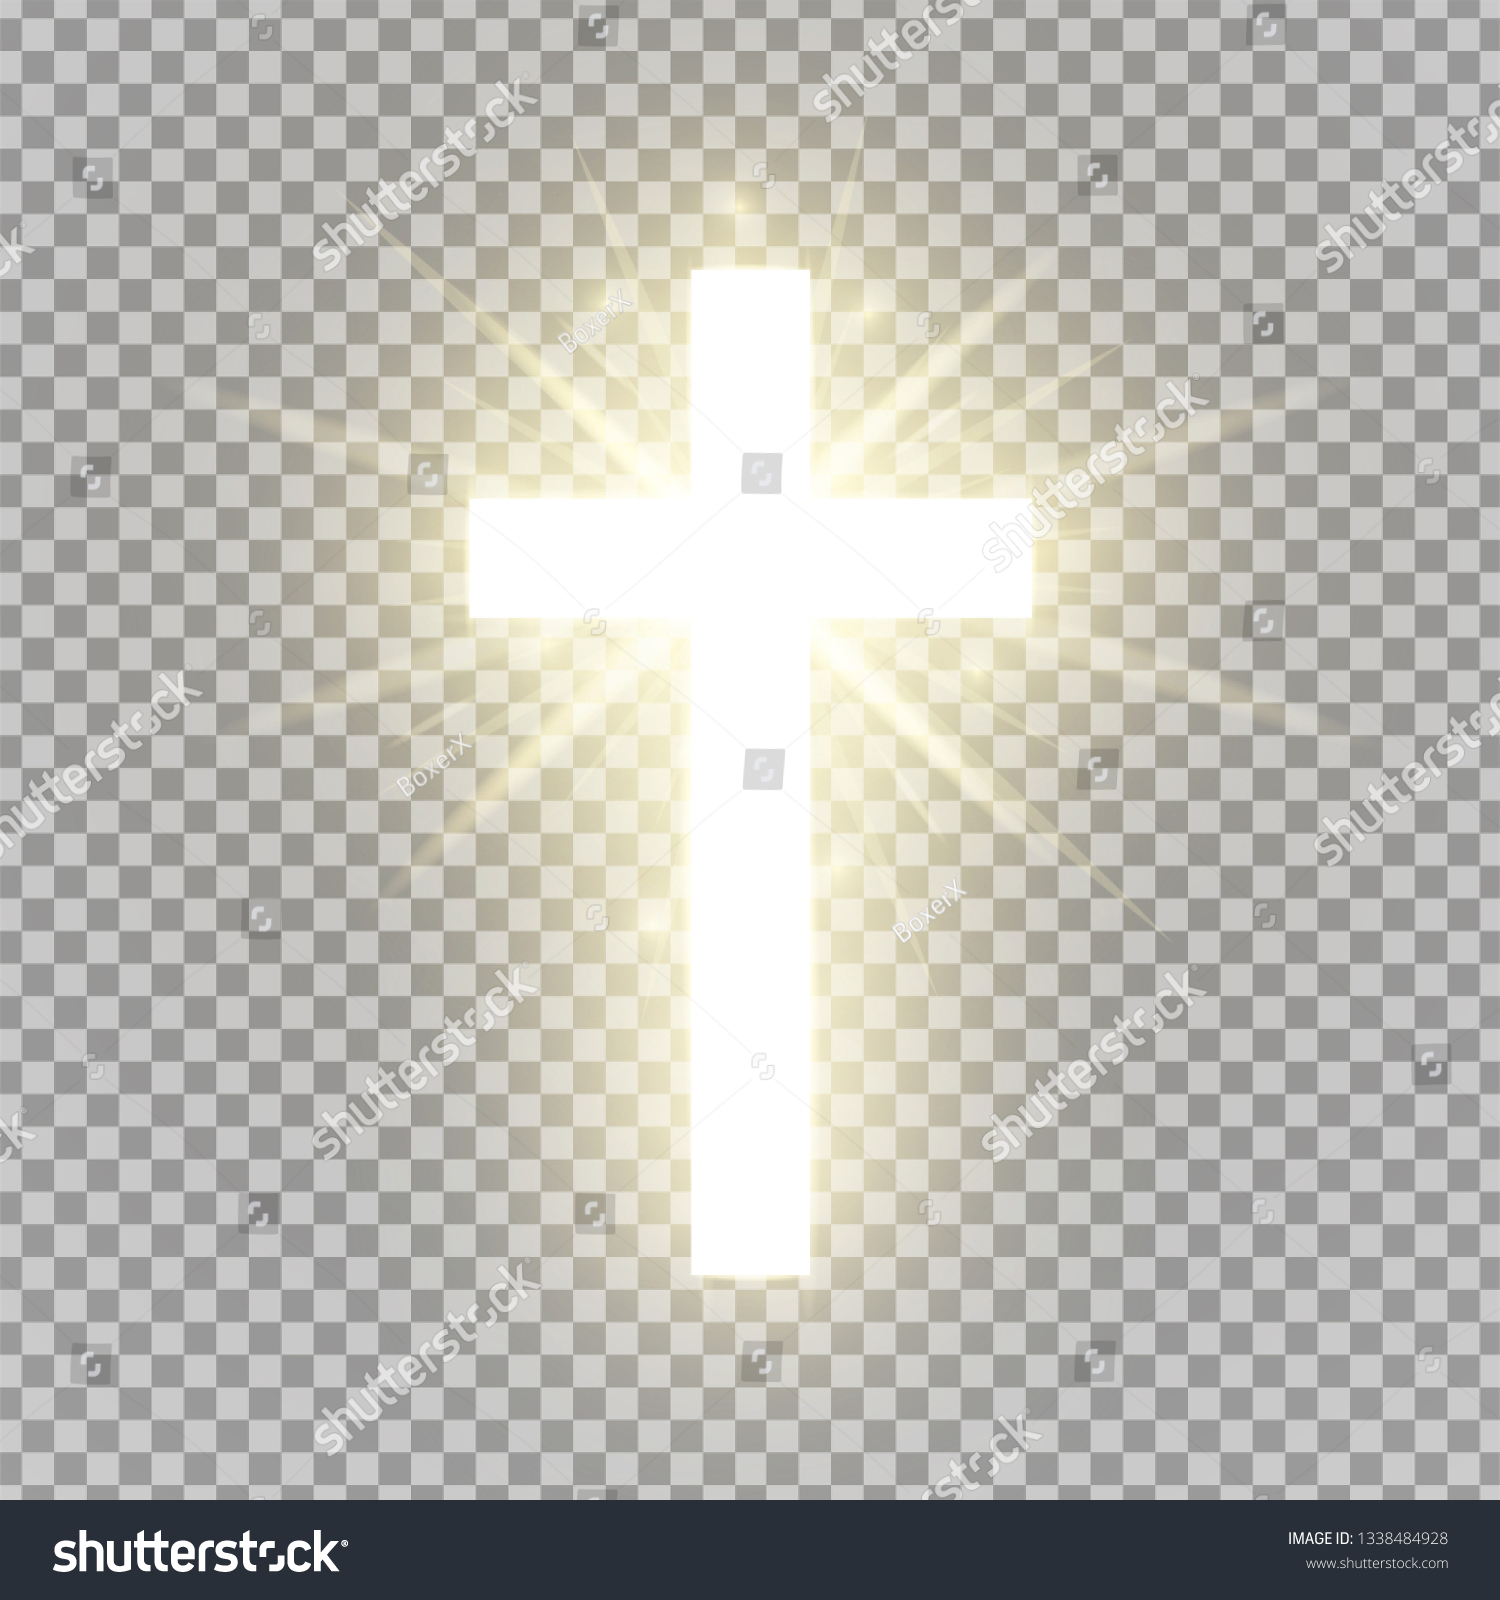 Shining cross isolated on transparent background. Riligious symbol. Glowing Saint cross. Easter and Christmas sign. Heaven concept. Vector illustration #1338484928